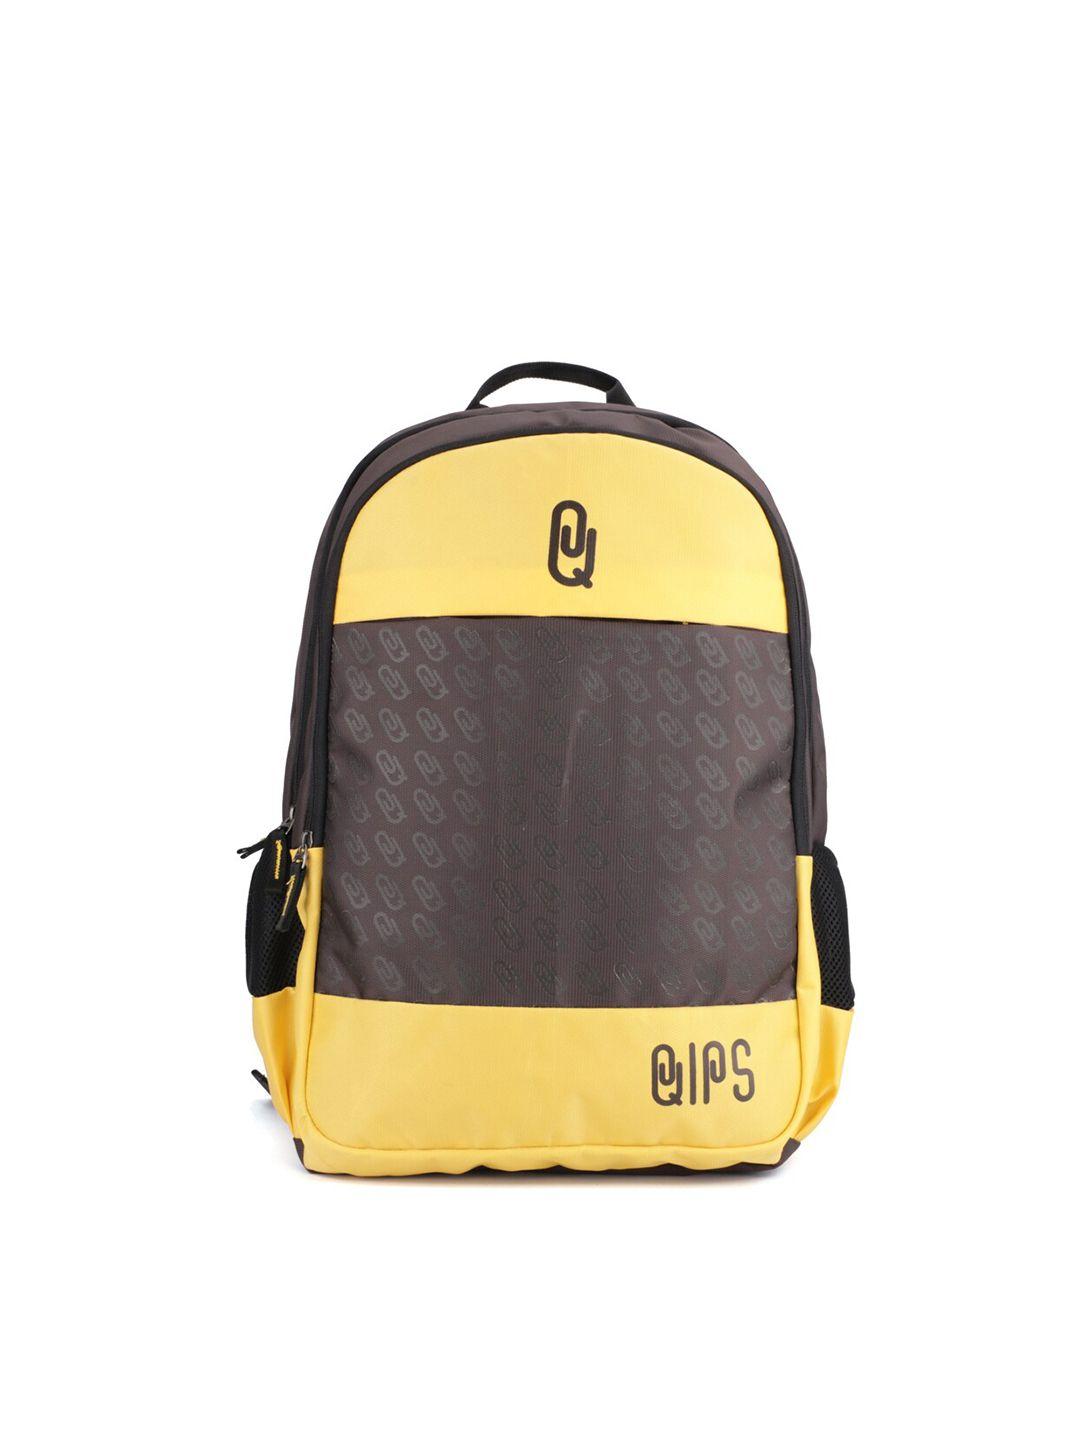 qips unisex brown & yellow brand logo 15 inch laptop backpack